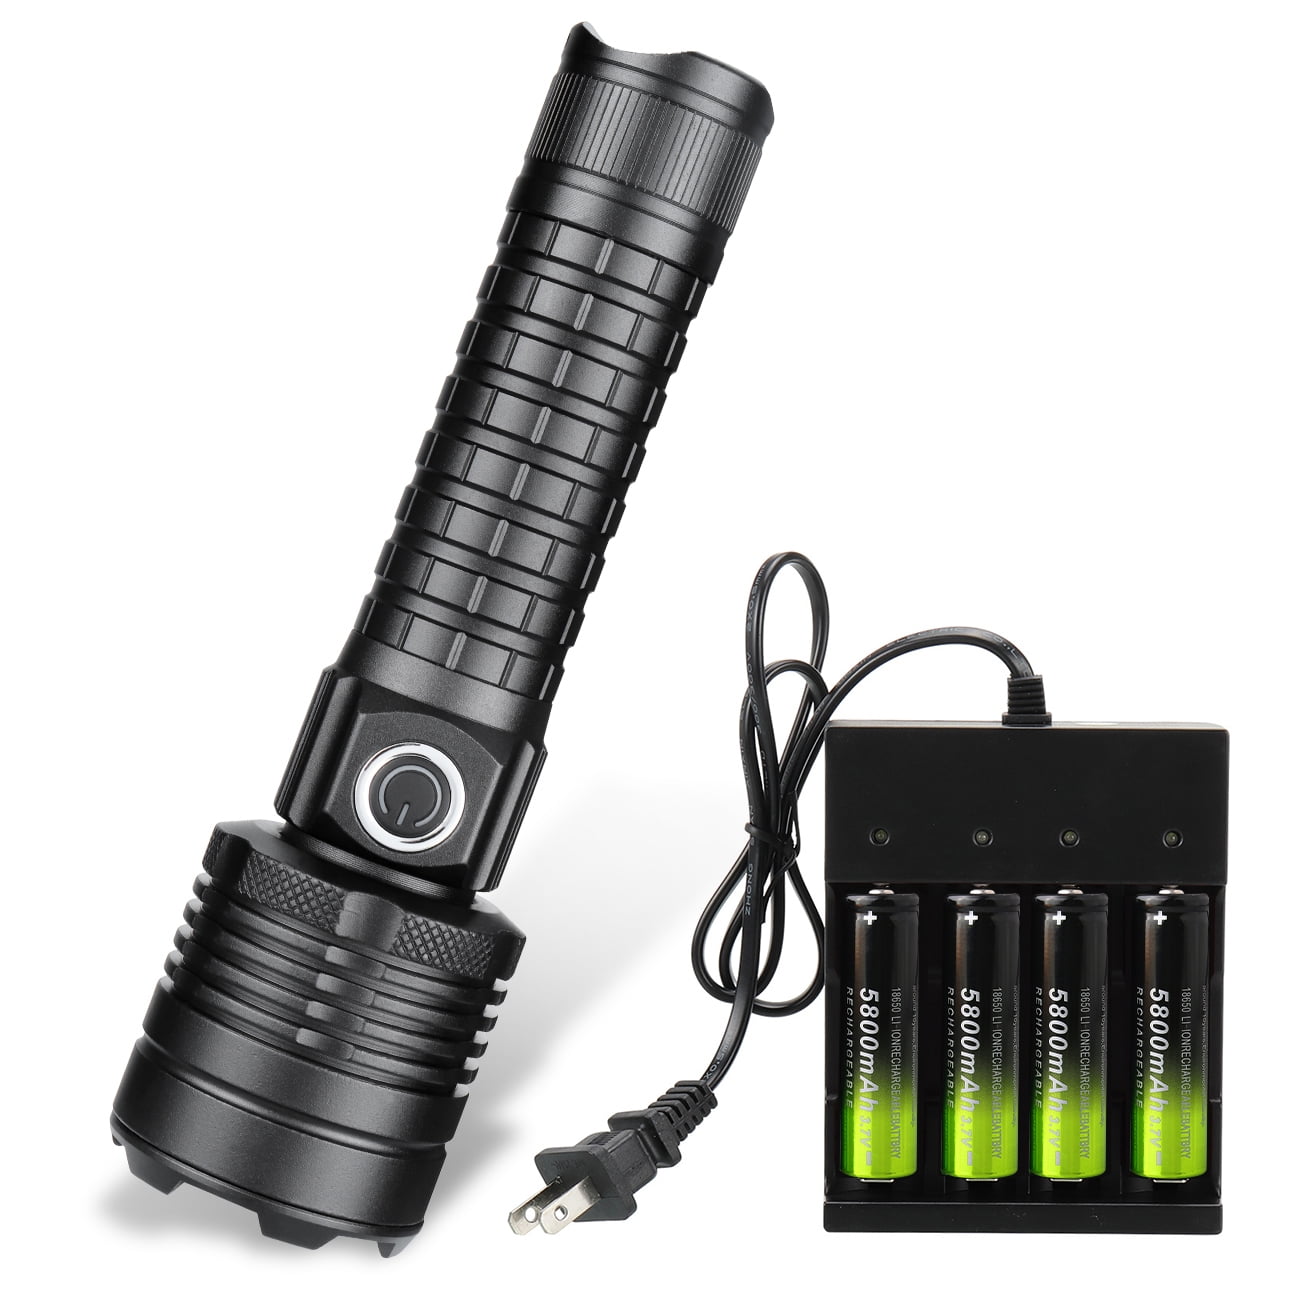 NEBO PaL+ 3-IN 1 POWER-BANK & FLASHLIGHT WITH 3" REMOVABLE BLADE 